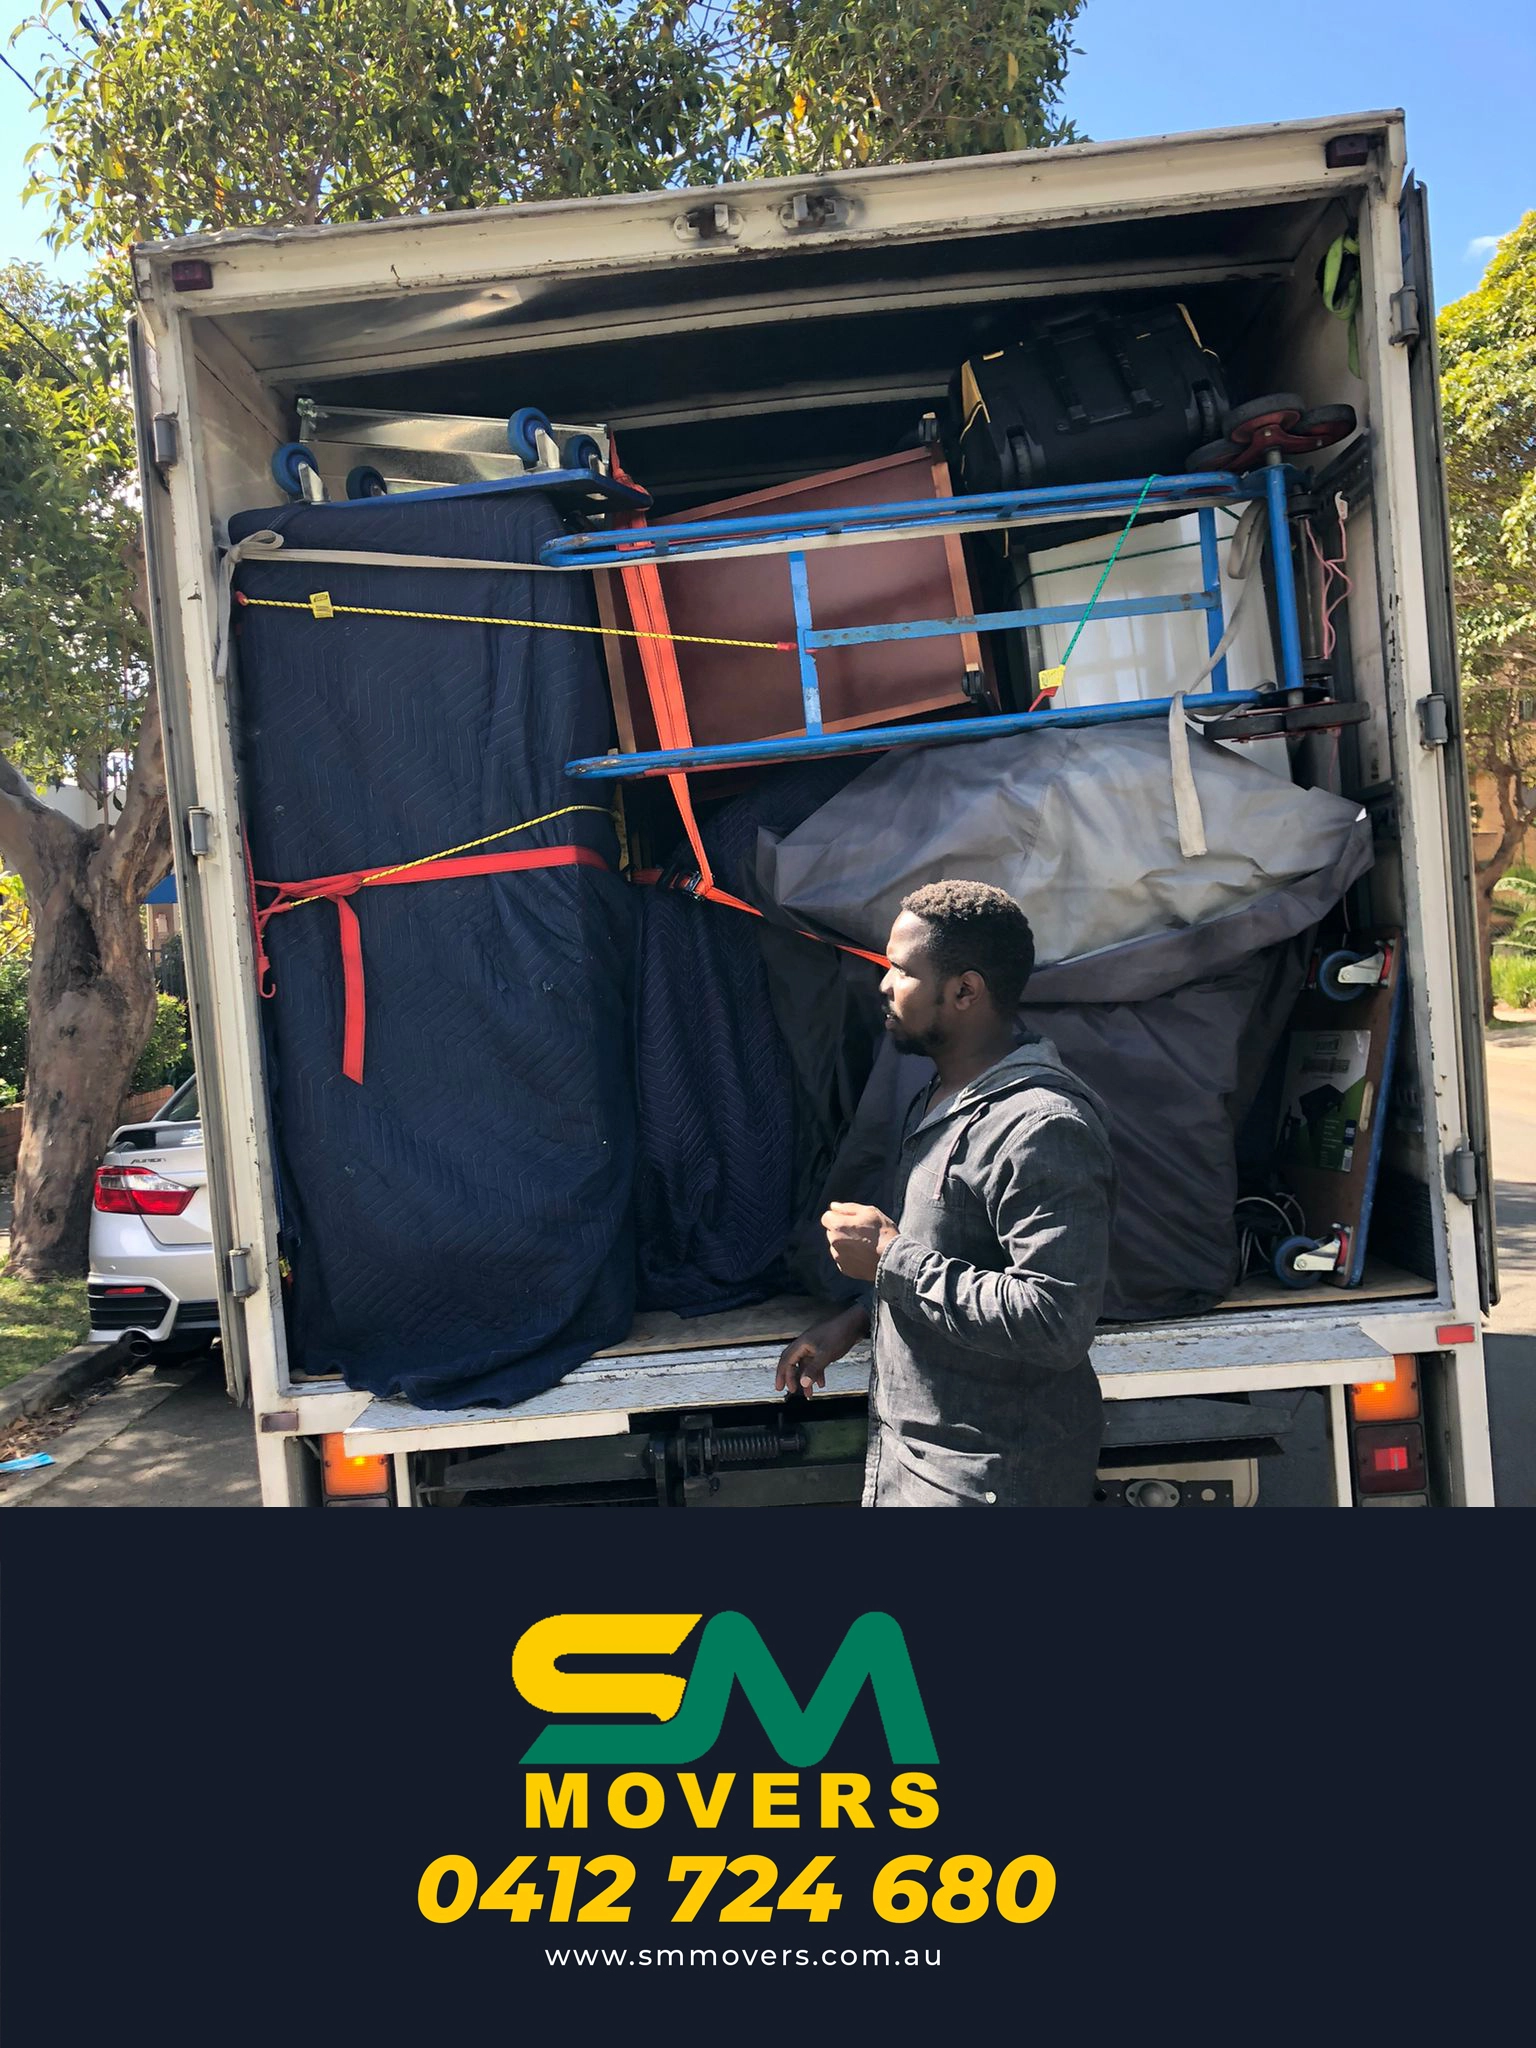 SM MOVERS - TRAINED REMOVALIST